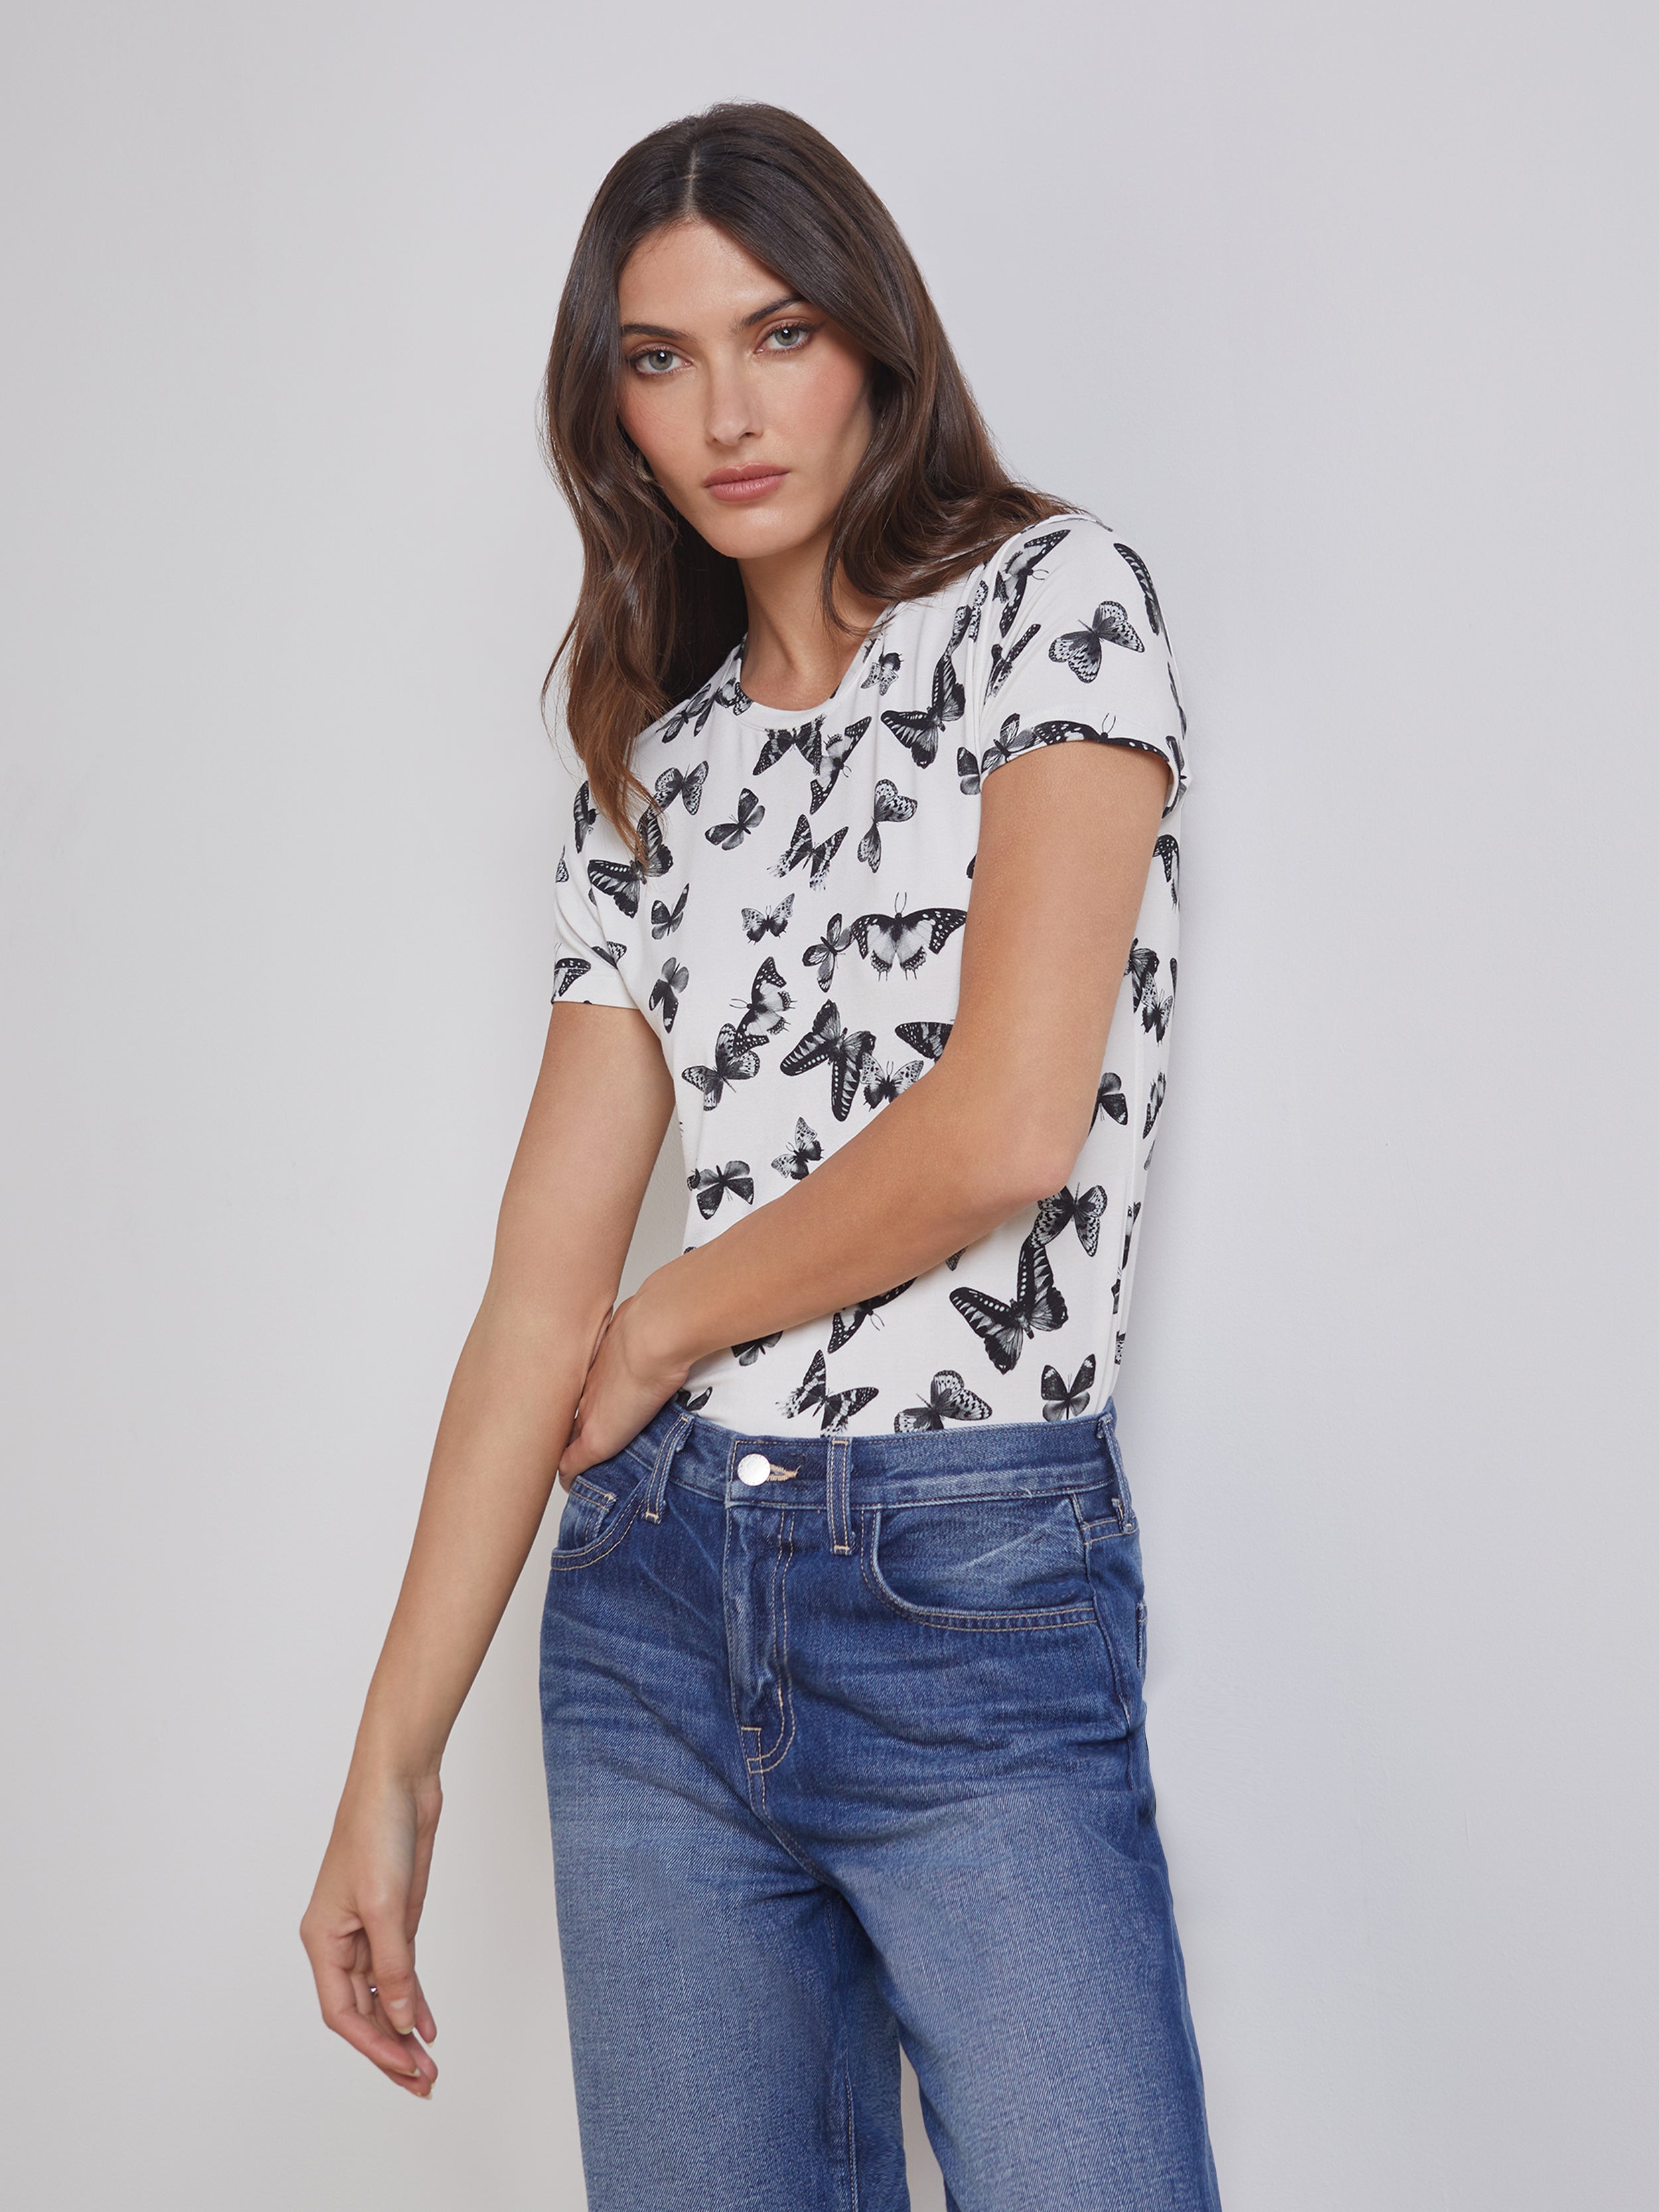 L\'AGENCE Ressi Slim-Fit Tee in Black/White Small Butterfly